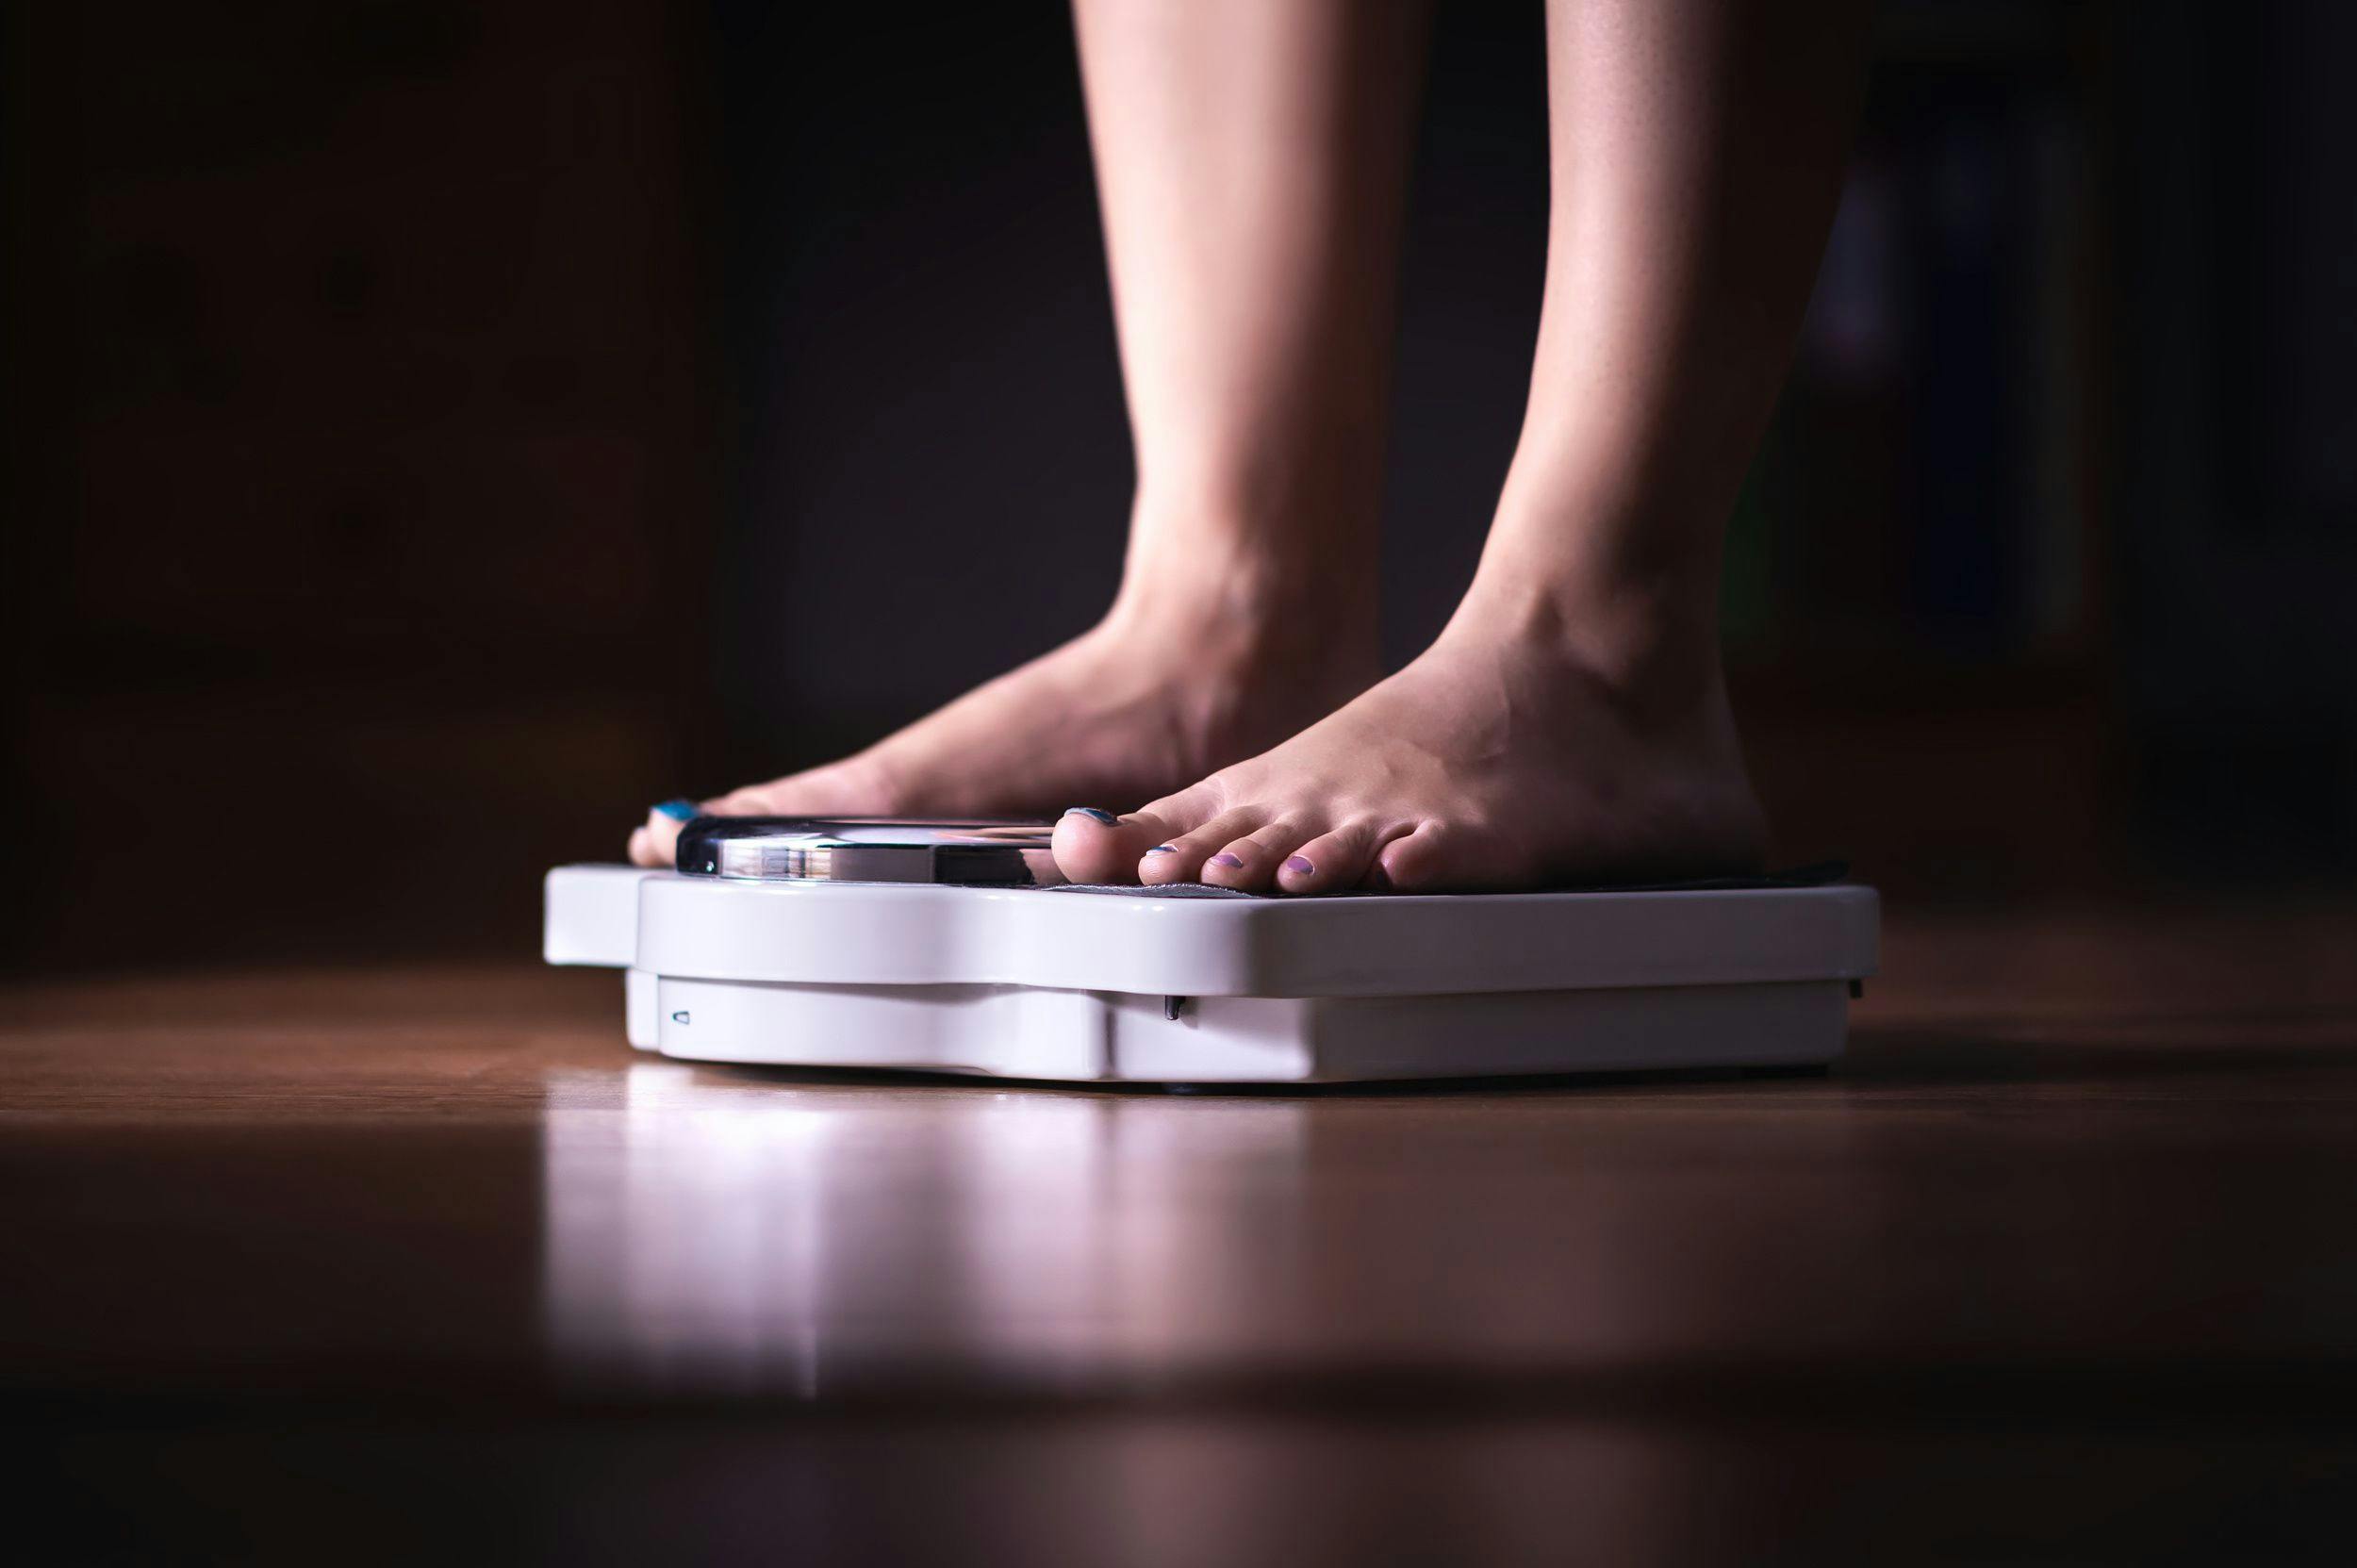 Obesity prevalence in United States linked to significant increase over 4 decades